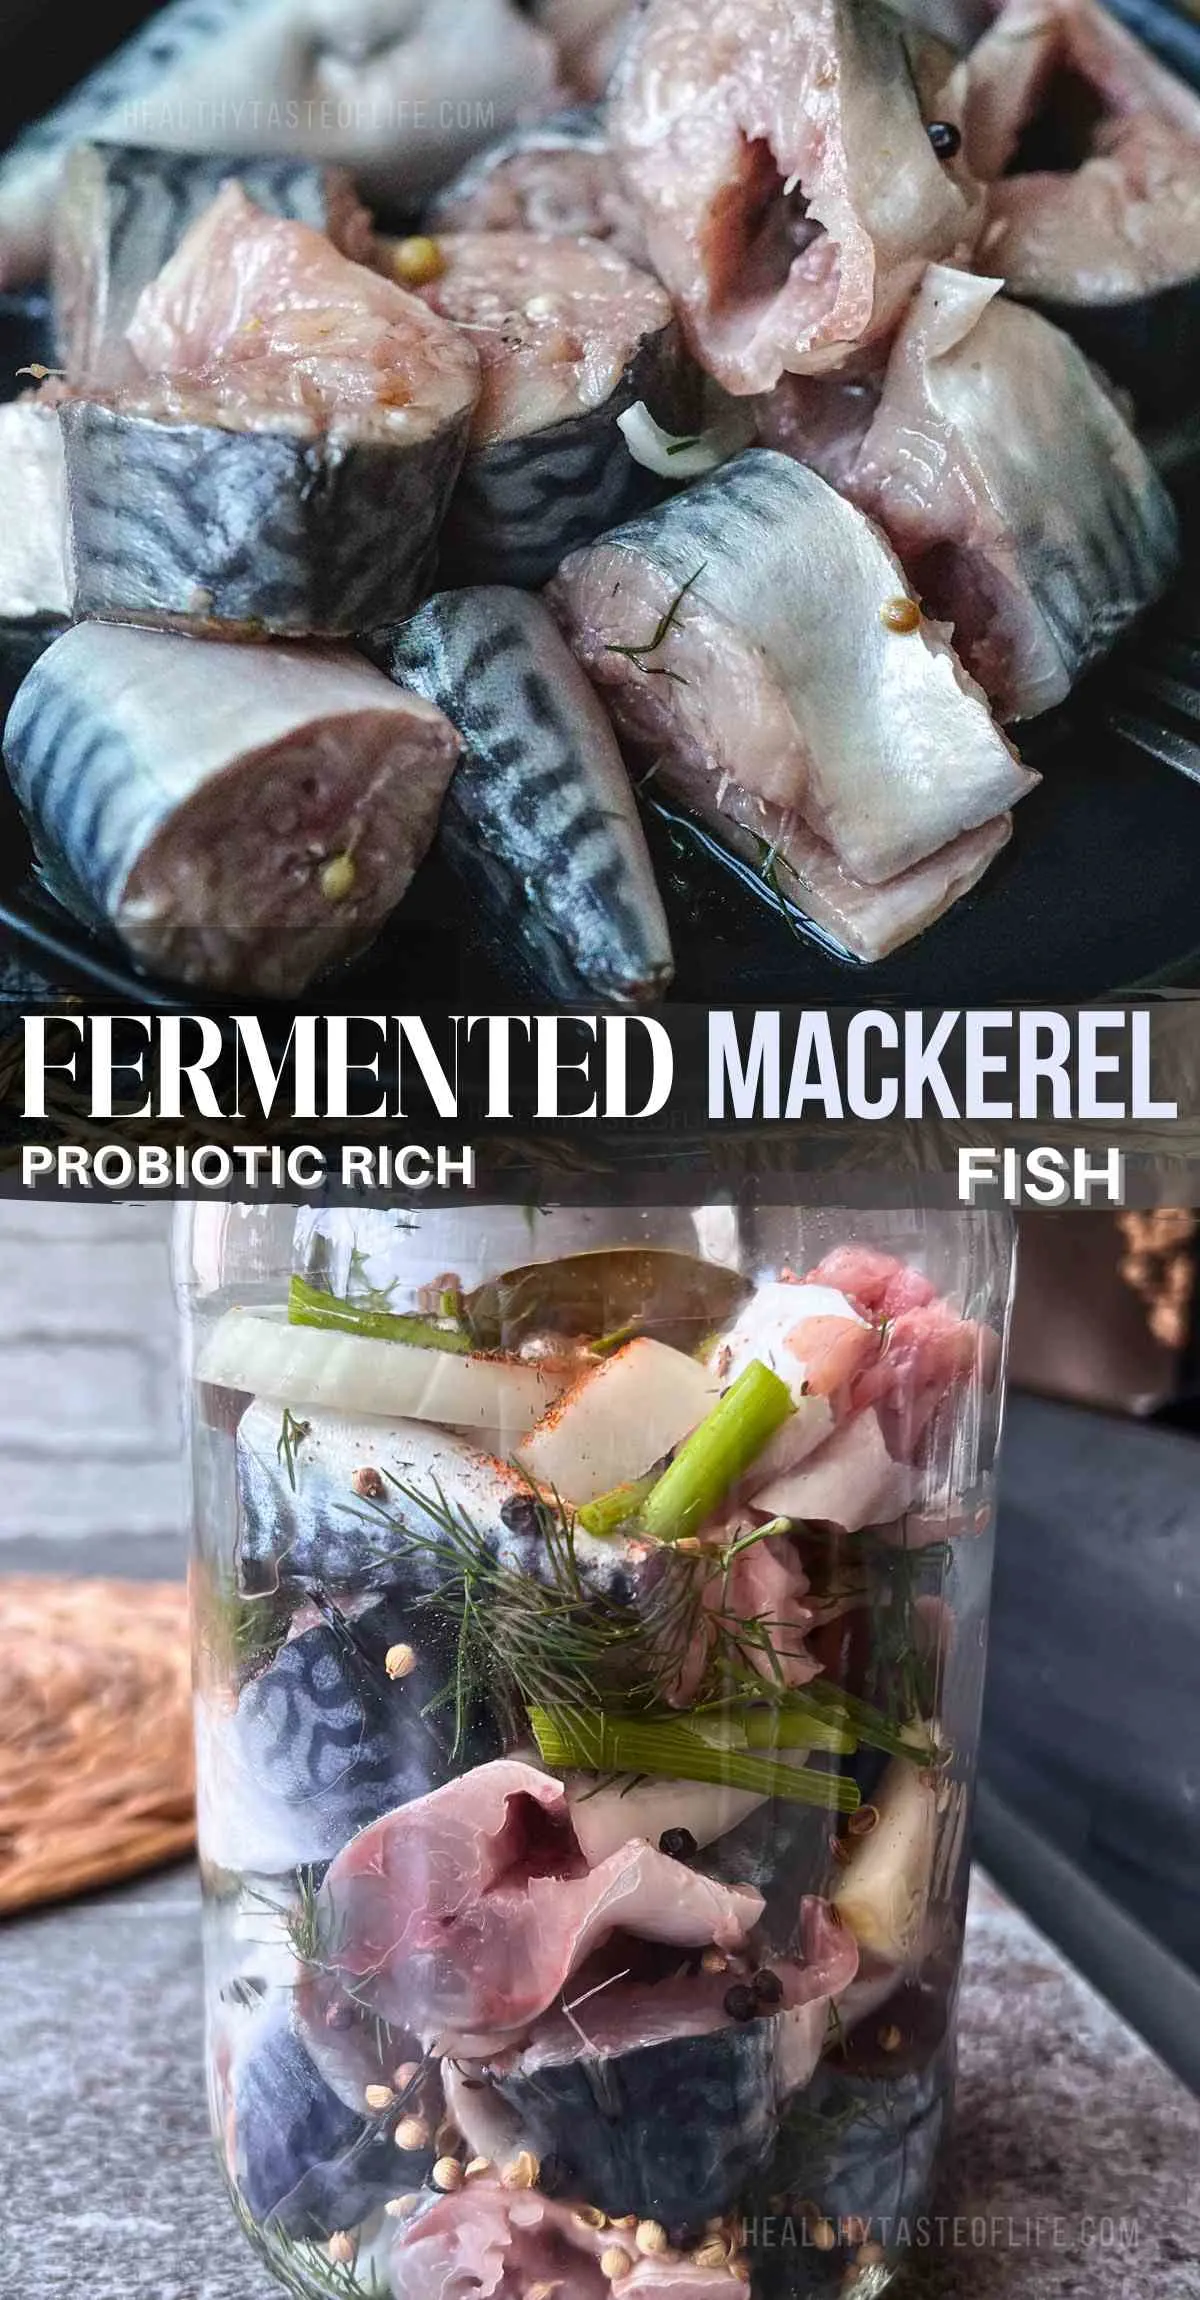 Learn how to preserve fresh mackerel with this ultimate guide on lacto-fermented fish! Unlock the secrets to perfectly fermented fish, learn the differences between cured mackerel and Surströmming, and experiment with flavors using different seasonings. Whether you're a fermentation novice or pro, this guide is a treasure trove of tips and recipes for fresh mackerel. #FermentedMackerel #FermentedFish #PreservingMackerel